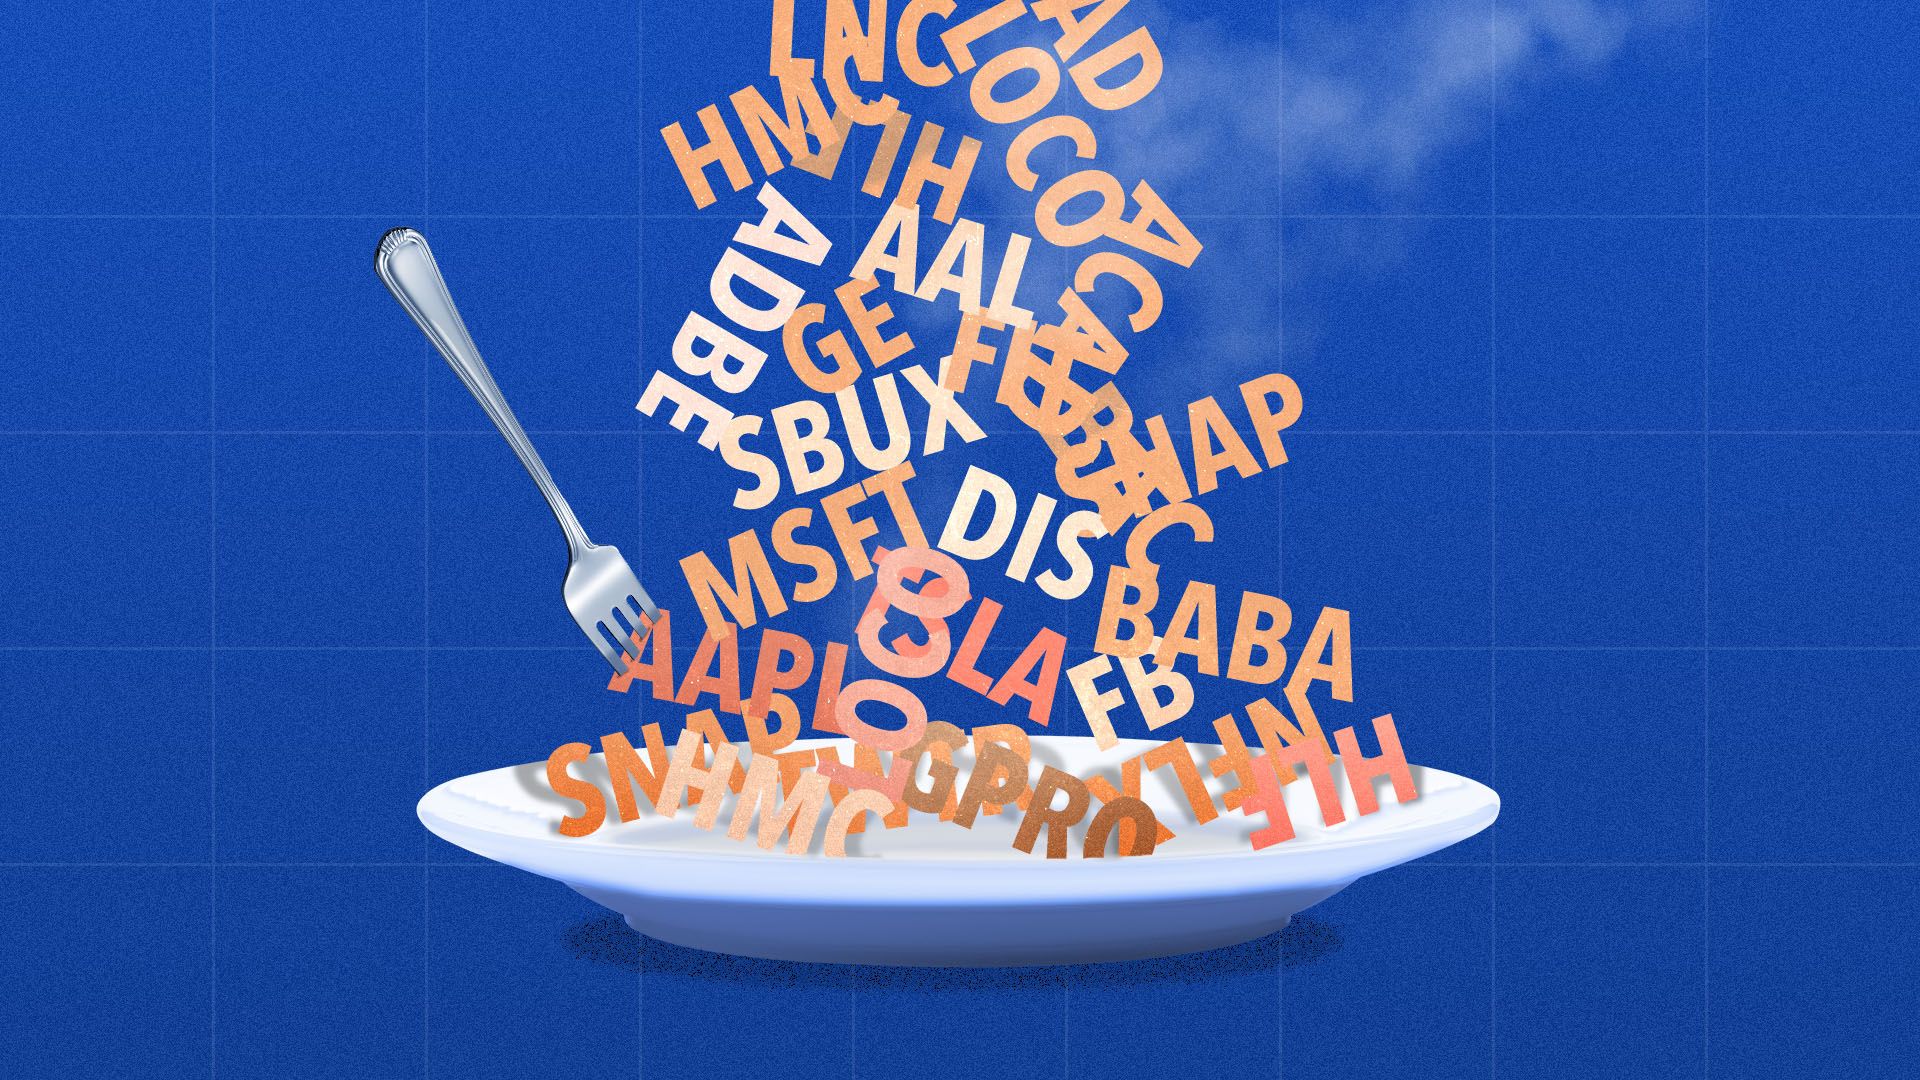 Illustration of a steaming plate full of stock market abbreviations with a fork sticking in them